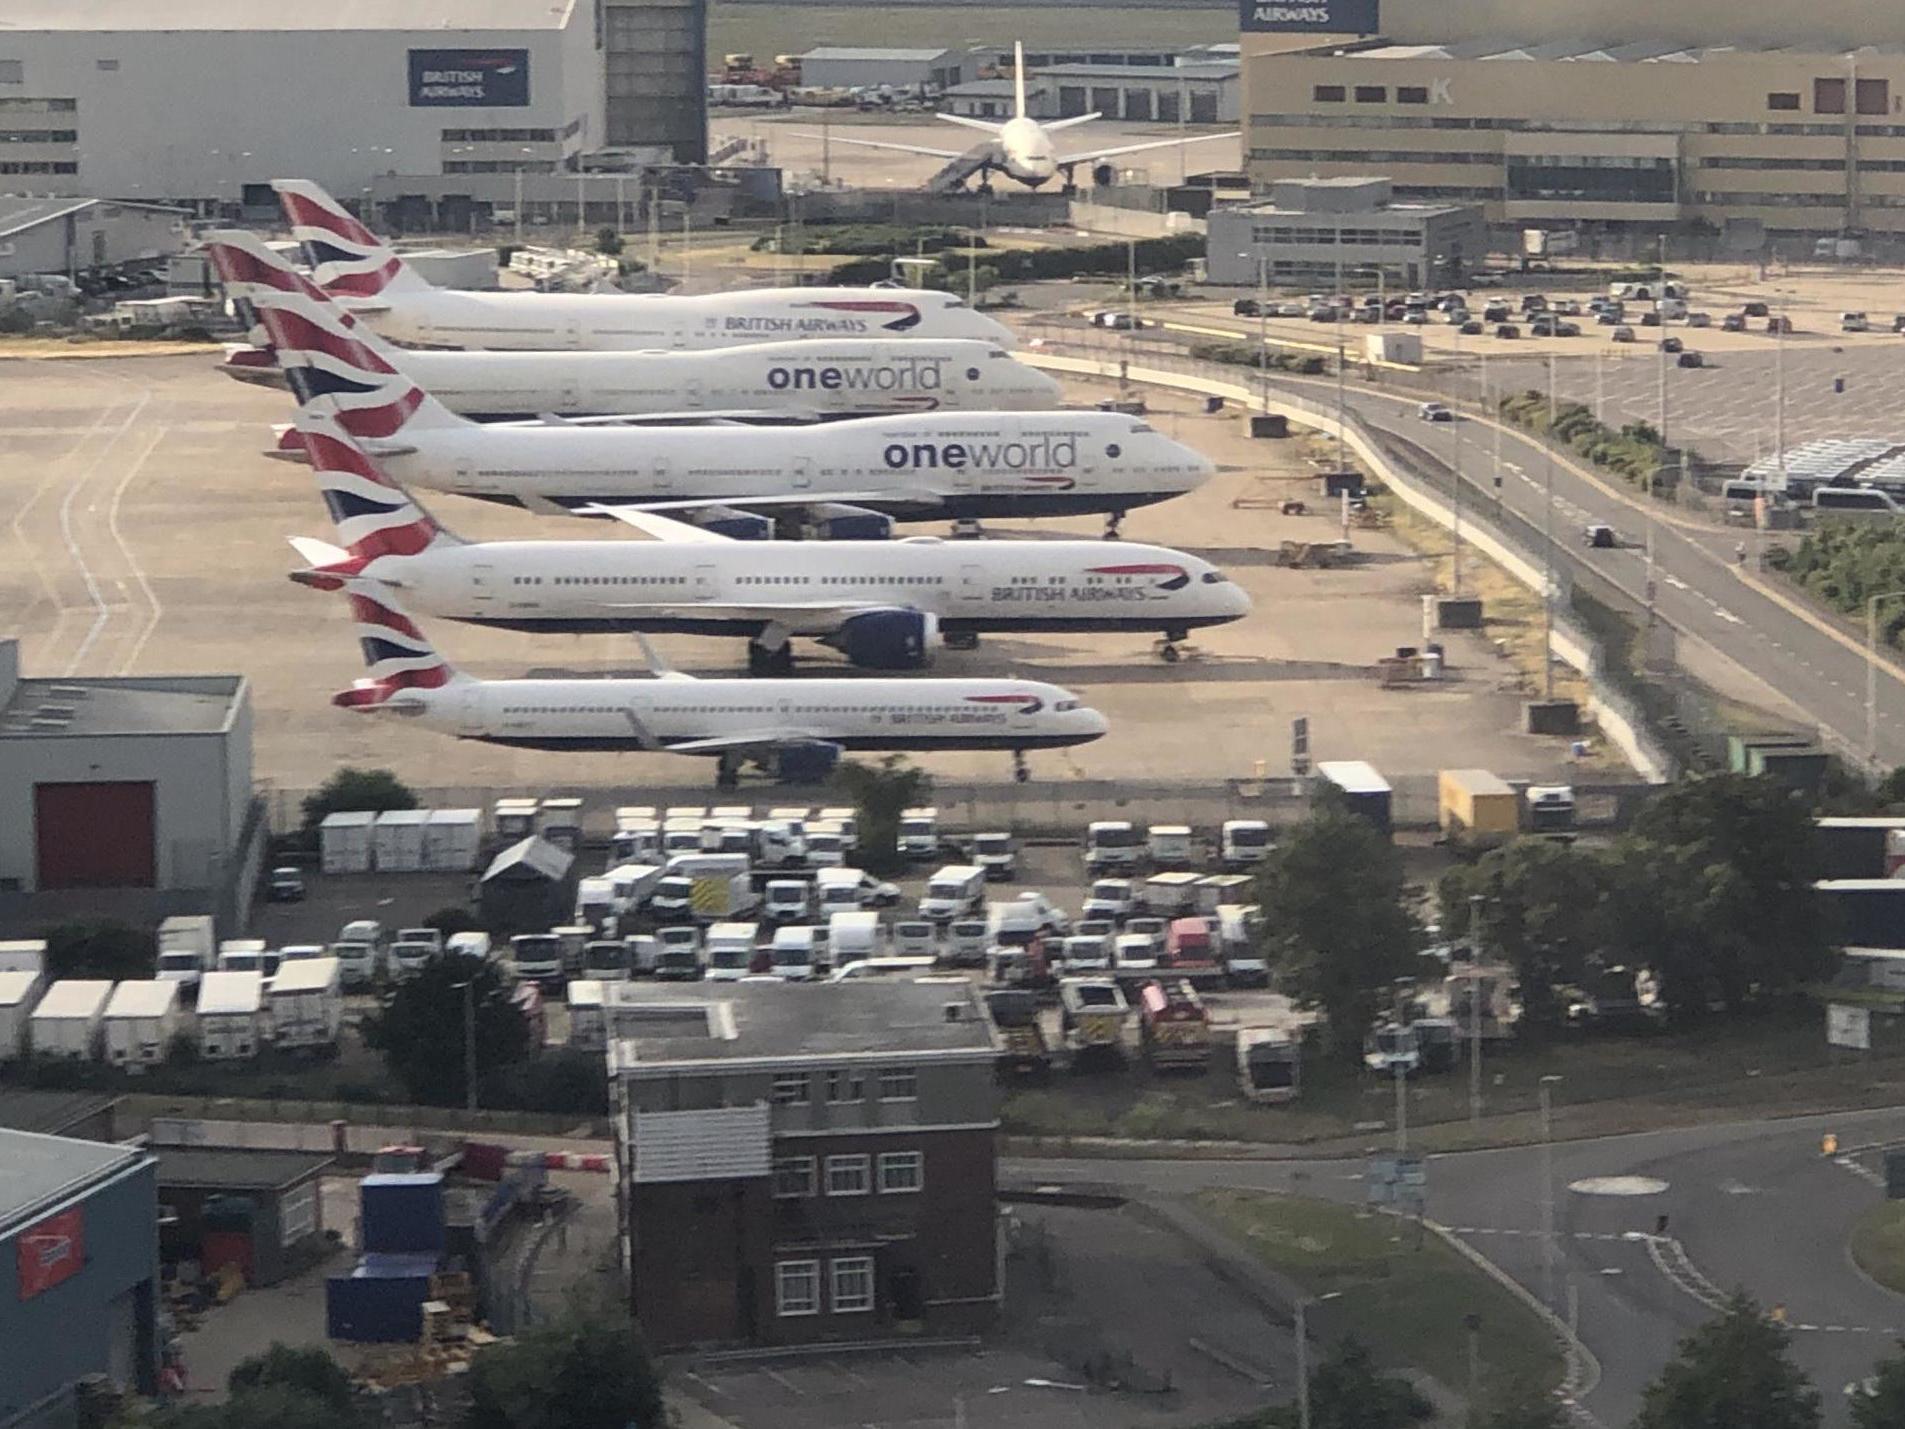 Moving story: BA’s top executives are said to be relocating to the engineering area at Heathrow